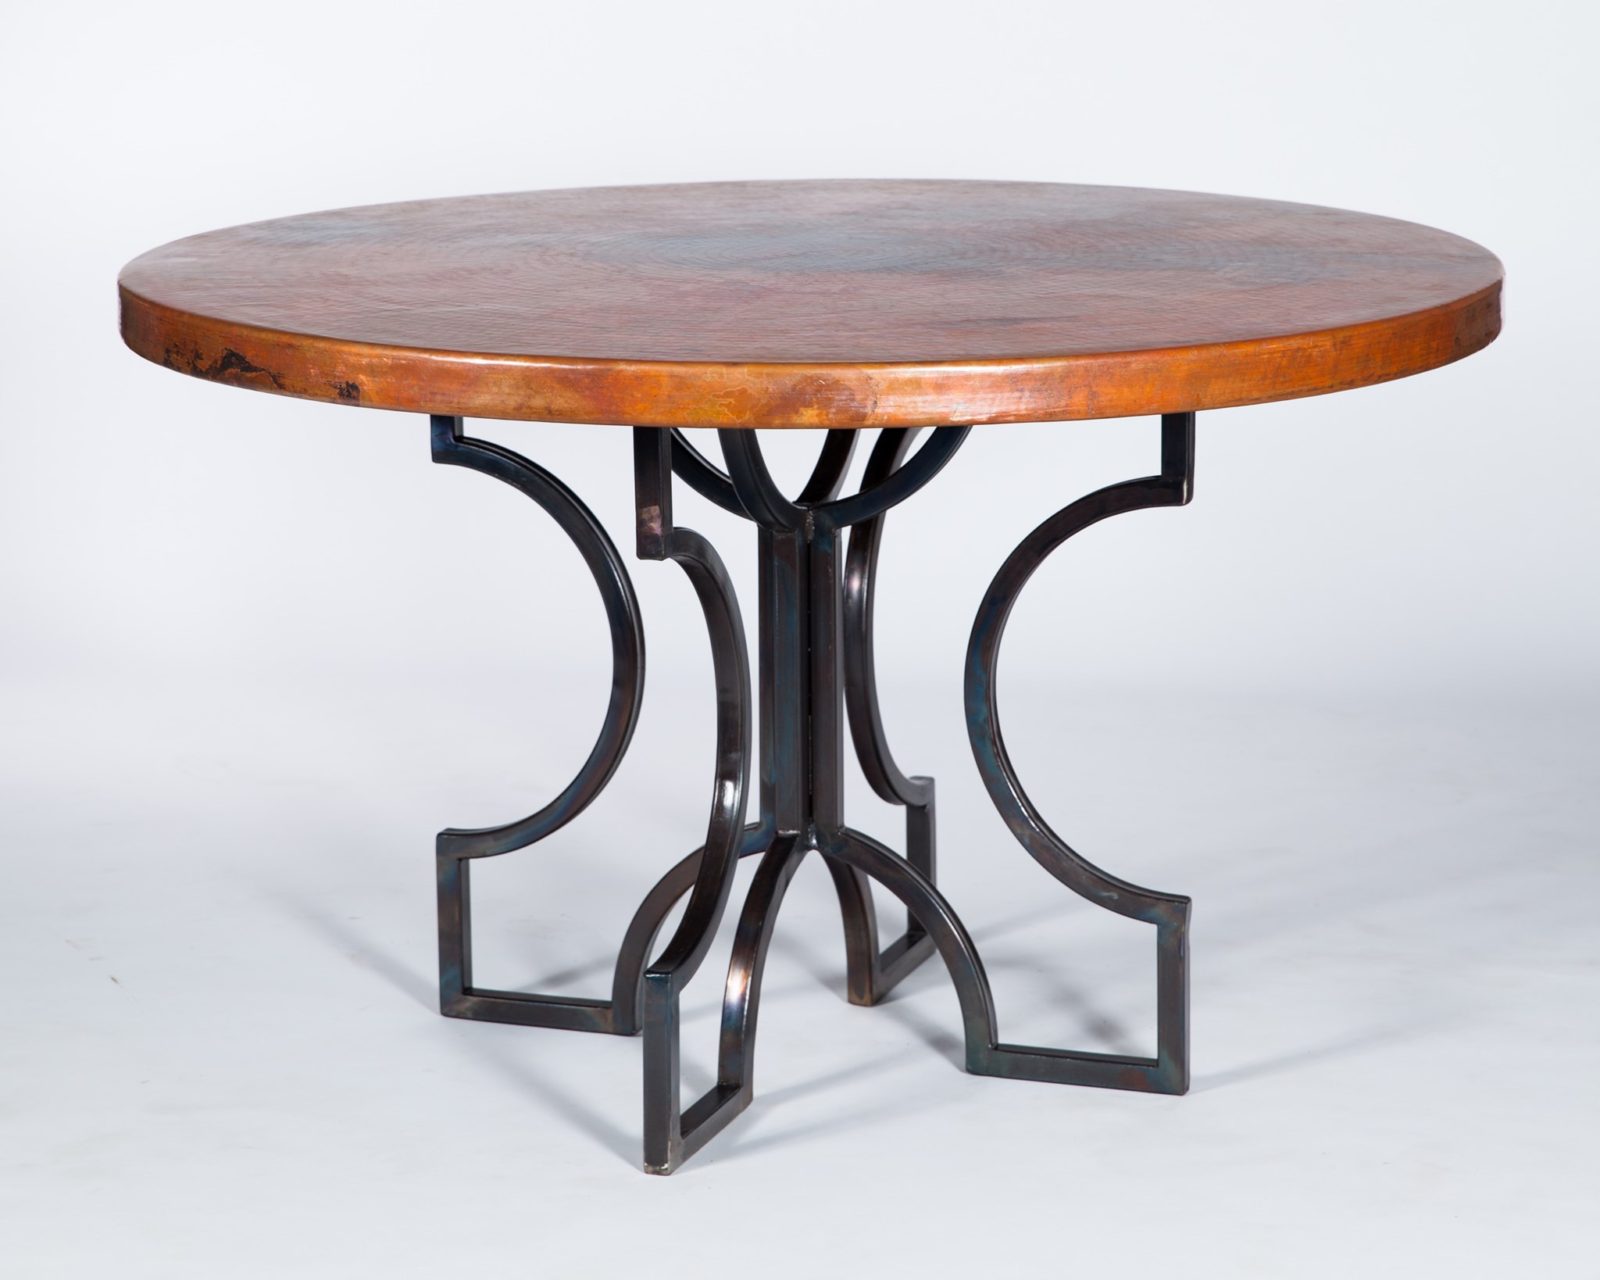 Round Copper Dining Room Table Crate And Barrel